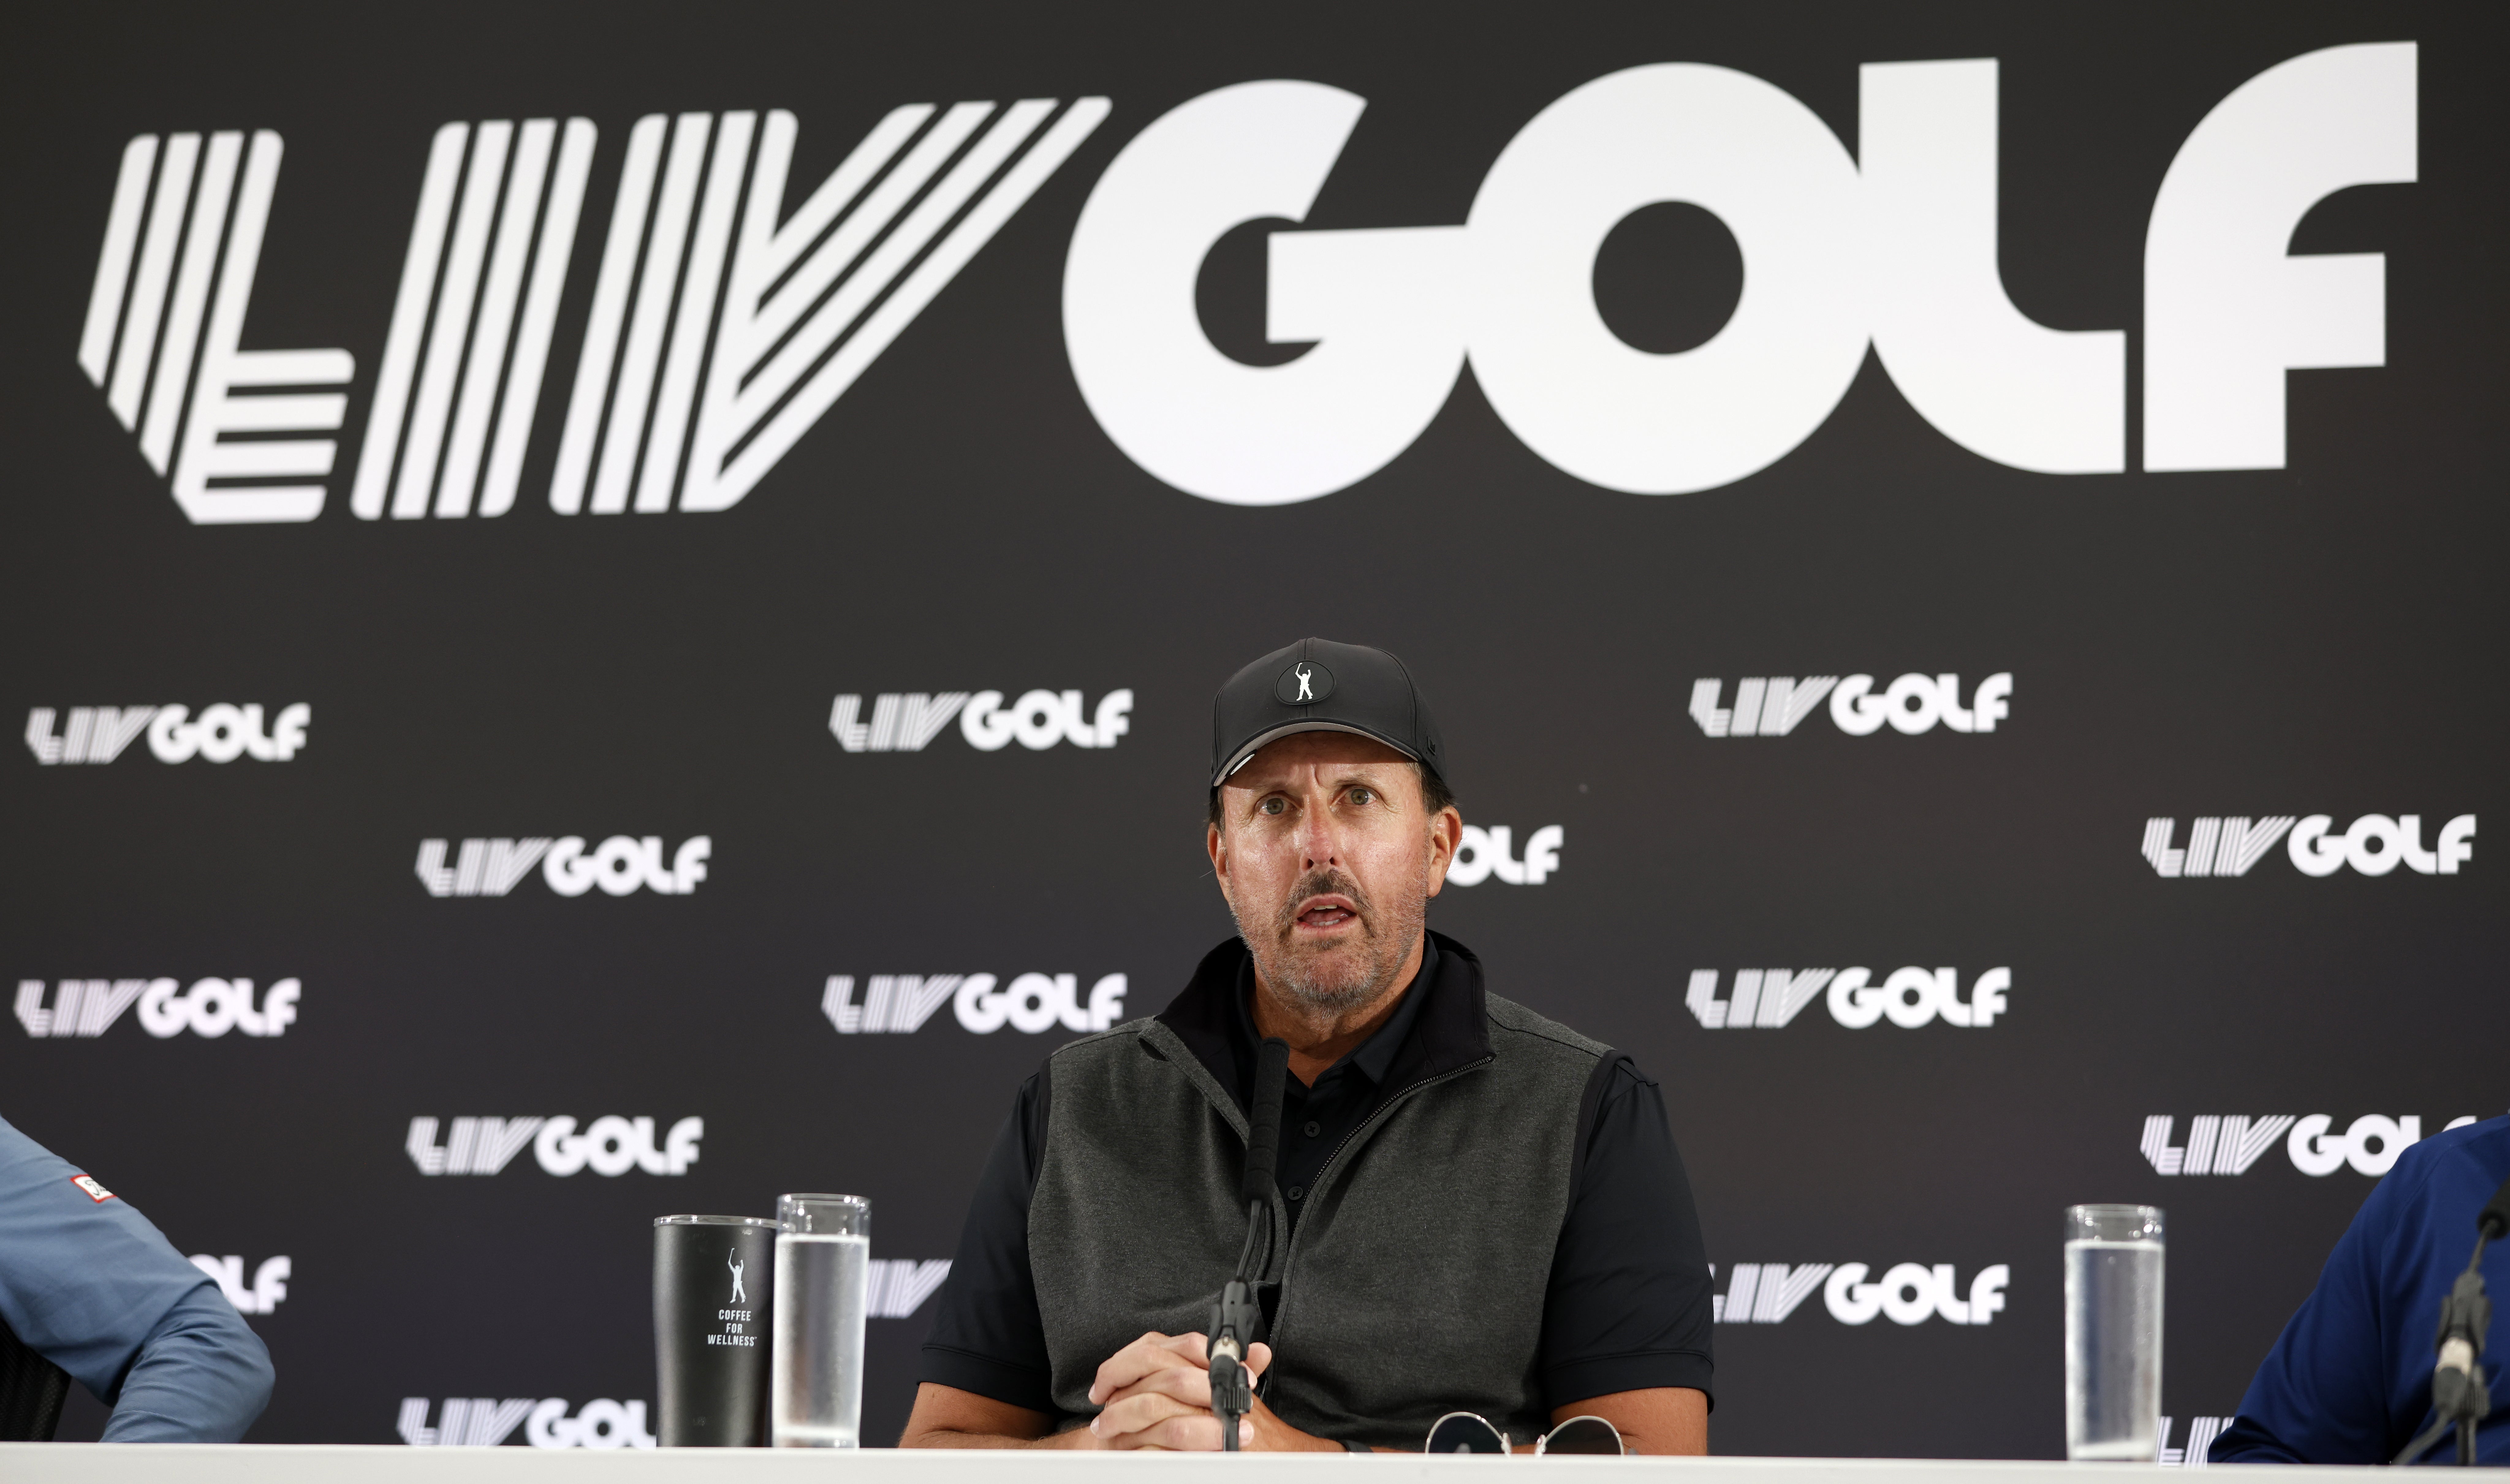 Phil Mickelson refused to comment on whether he had been suspended by the PGA Tour (Steve Paston/PA)